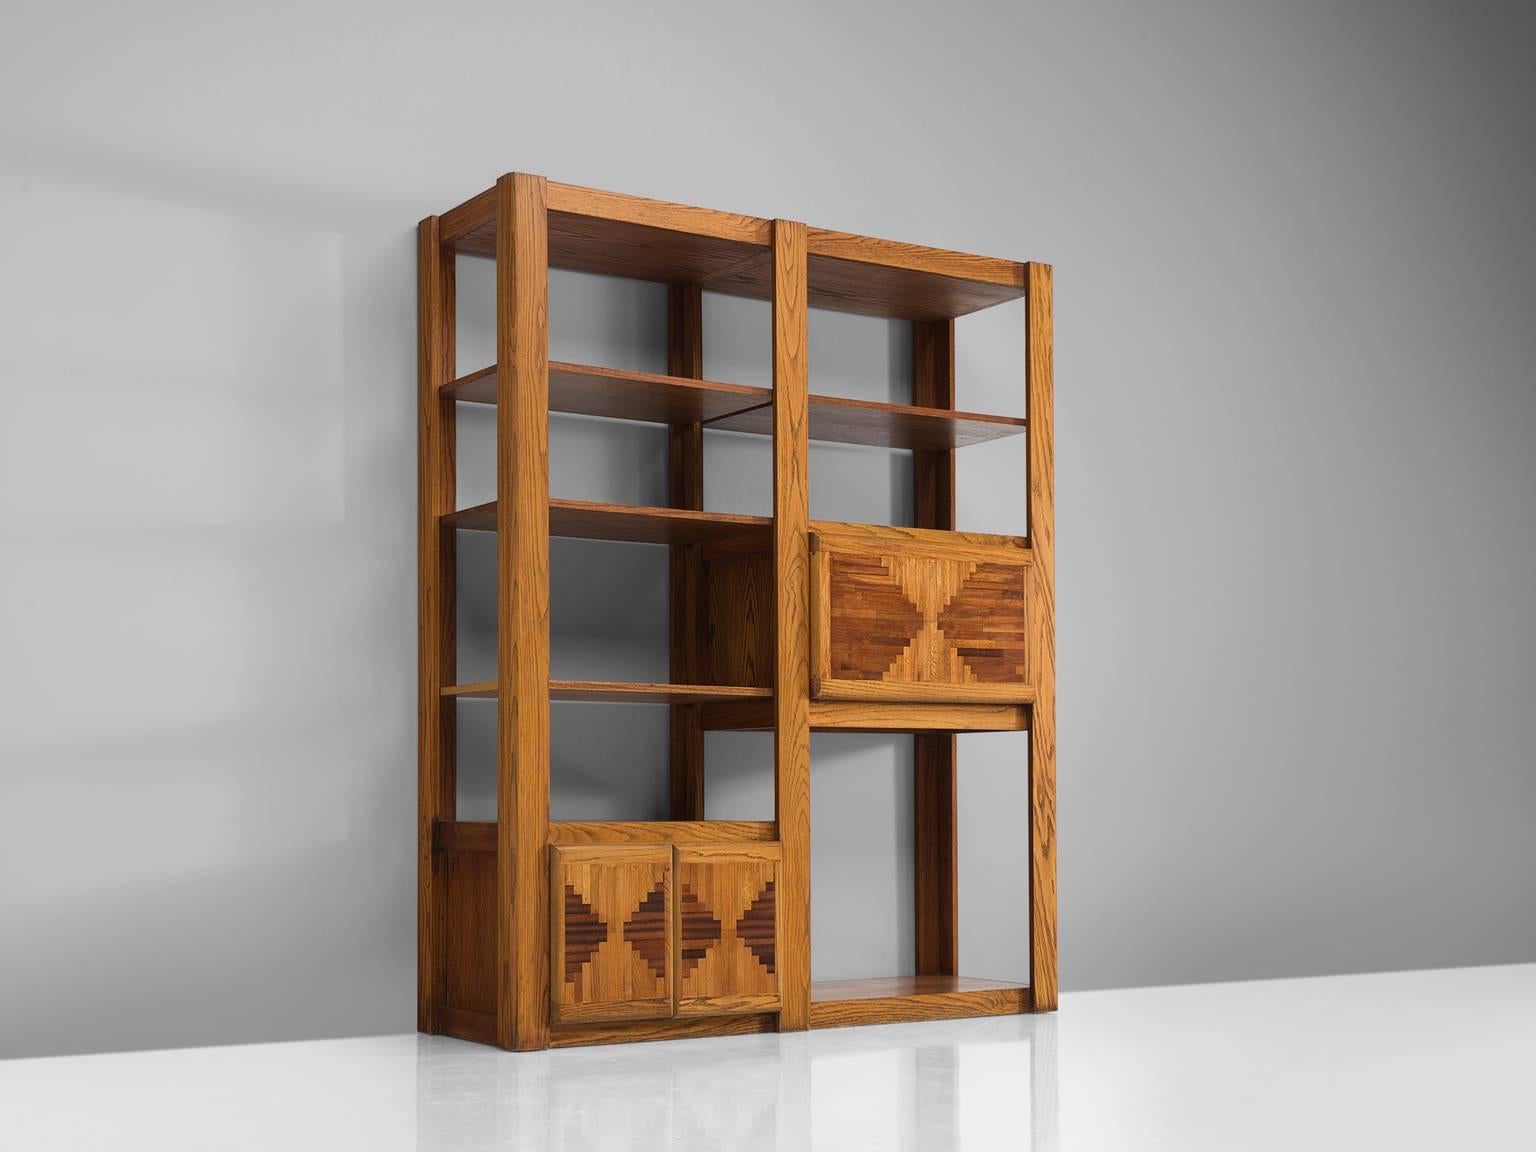 Bookshelf, walnut, beech, Italy, 1950s.

This grand, playful chest is custom-built in the 1950s. The design of this original cabinet is original with a lower cabinet with two marquetry doors and a higher cabinet with a single marquetry door. The